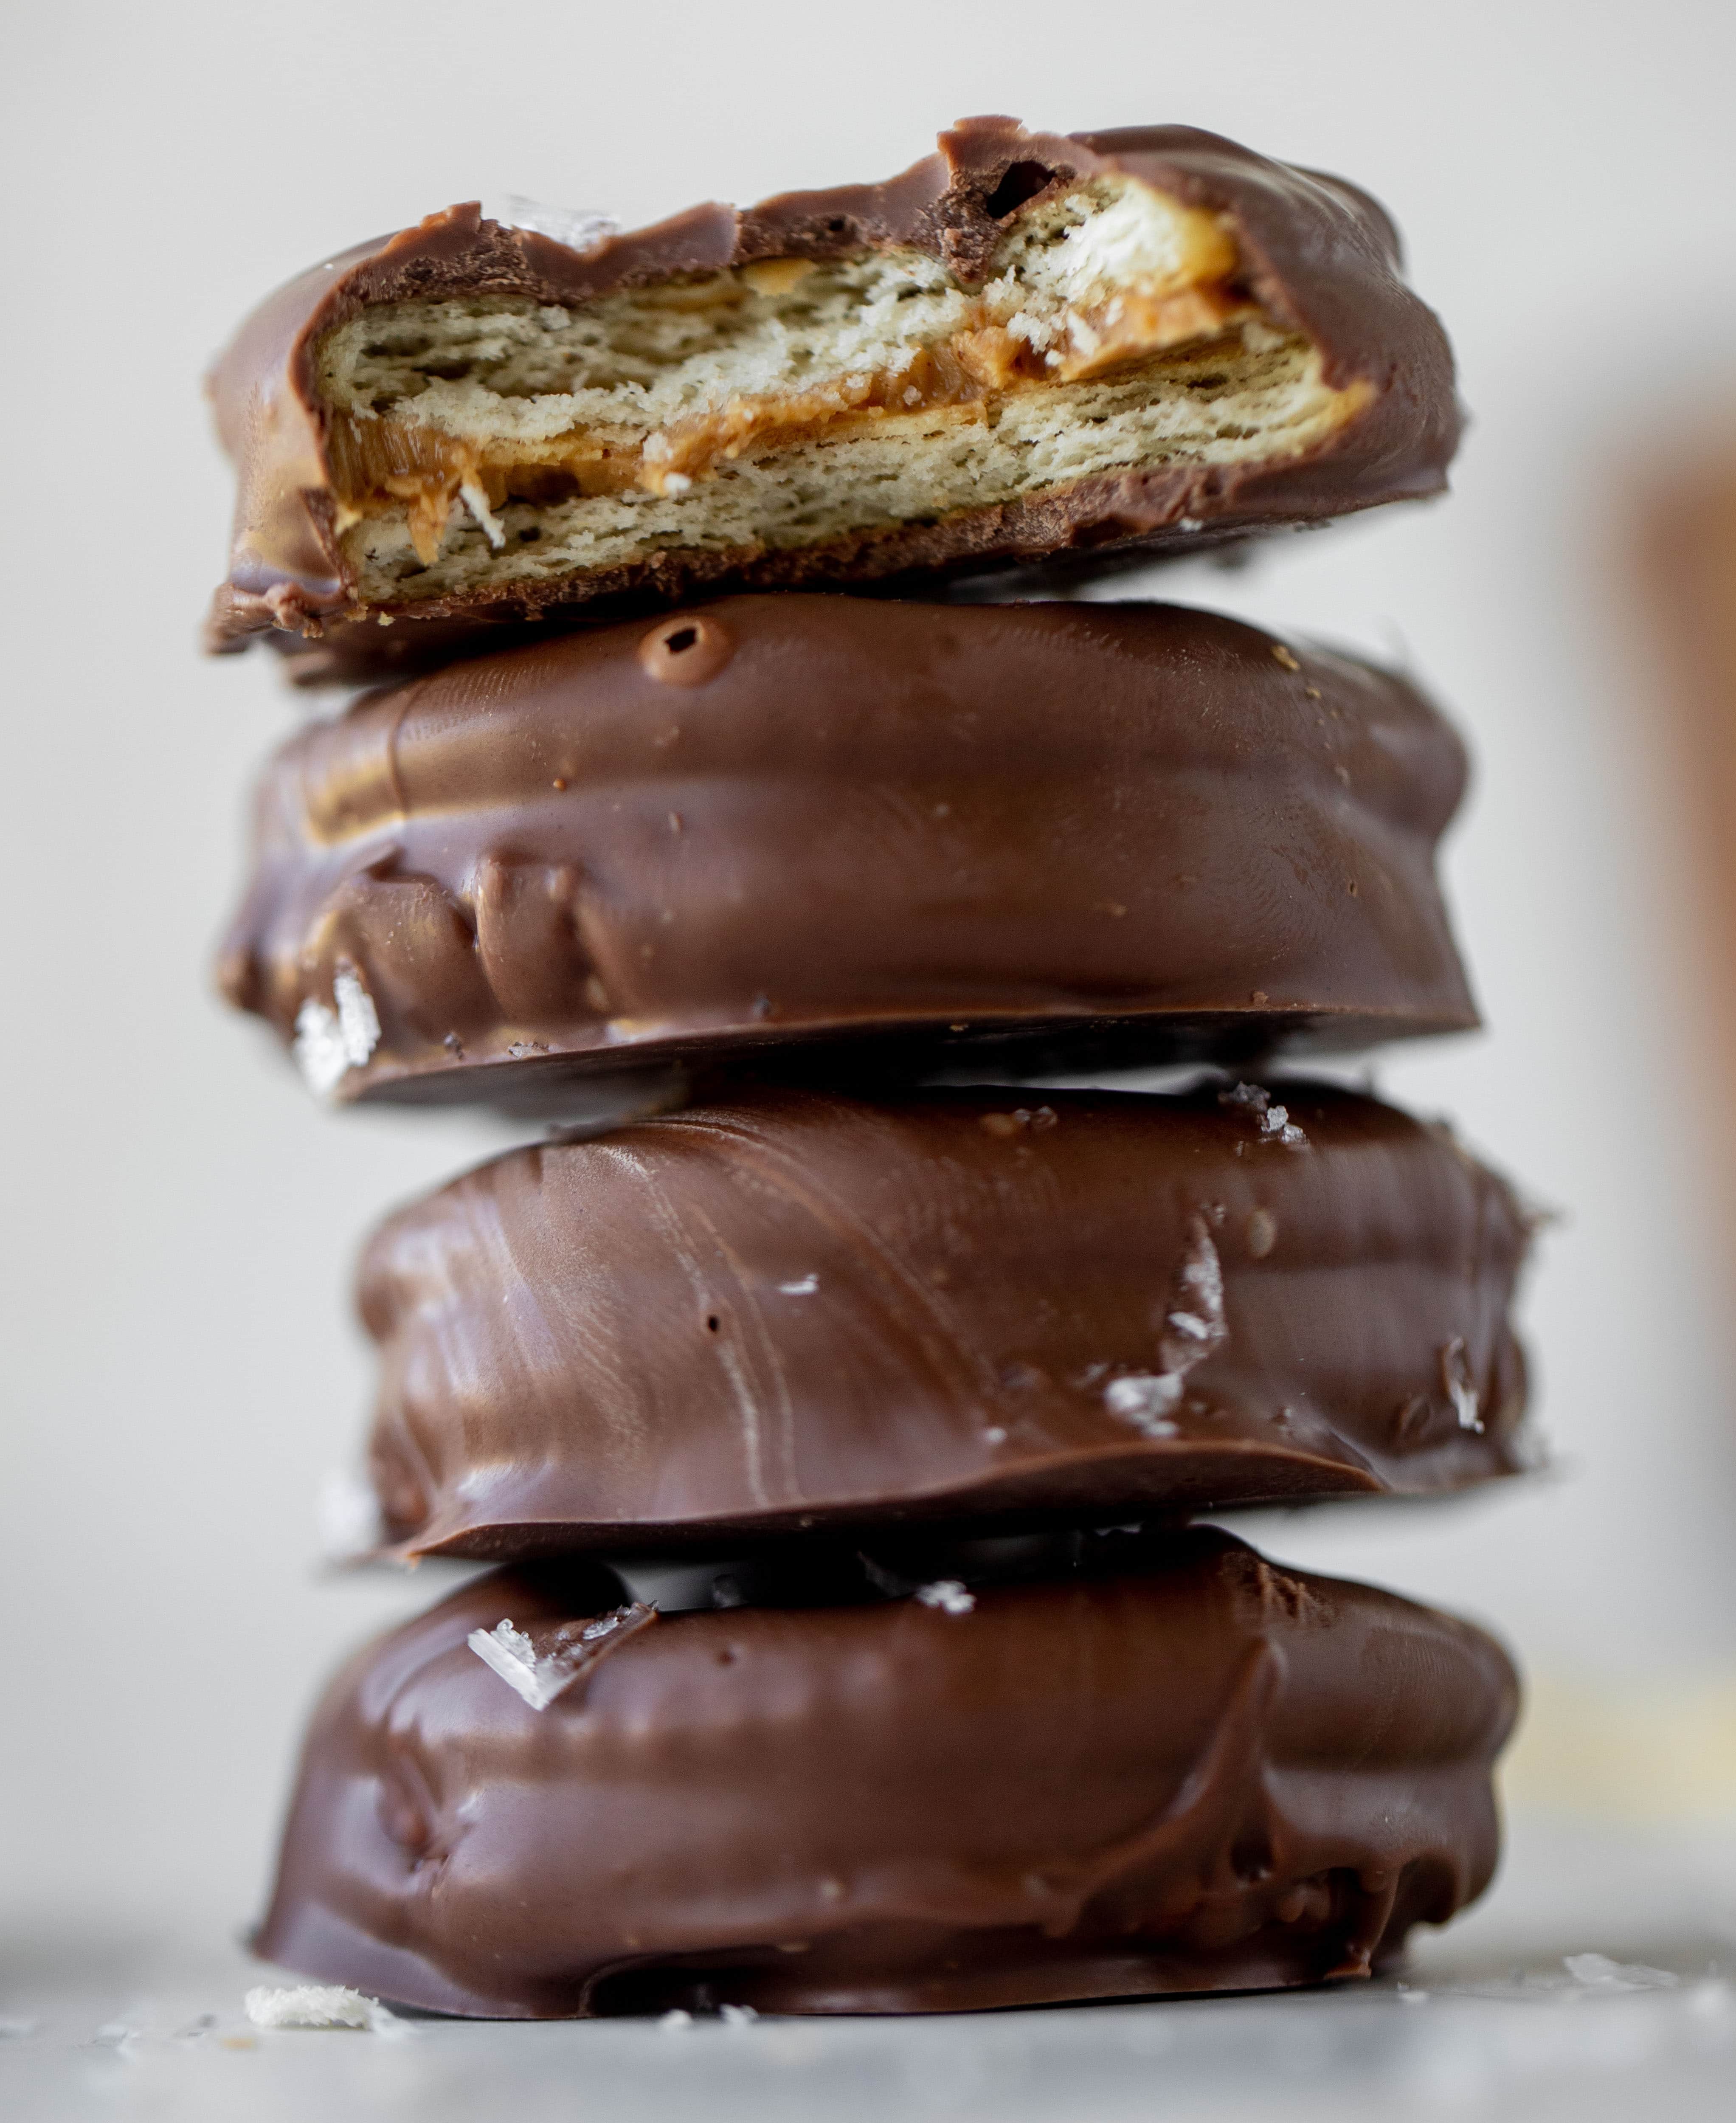 These ritz peanut butter cups are everything! Creamy peanut butter, flakey, buttery crackers, melted chocolate and flaked salt. They are unreal.